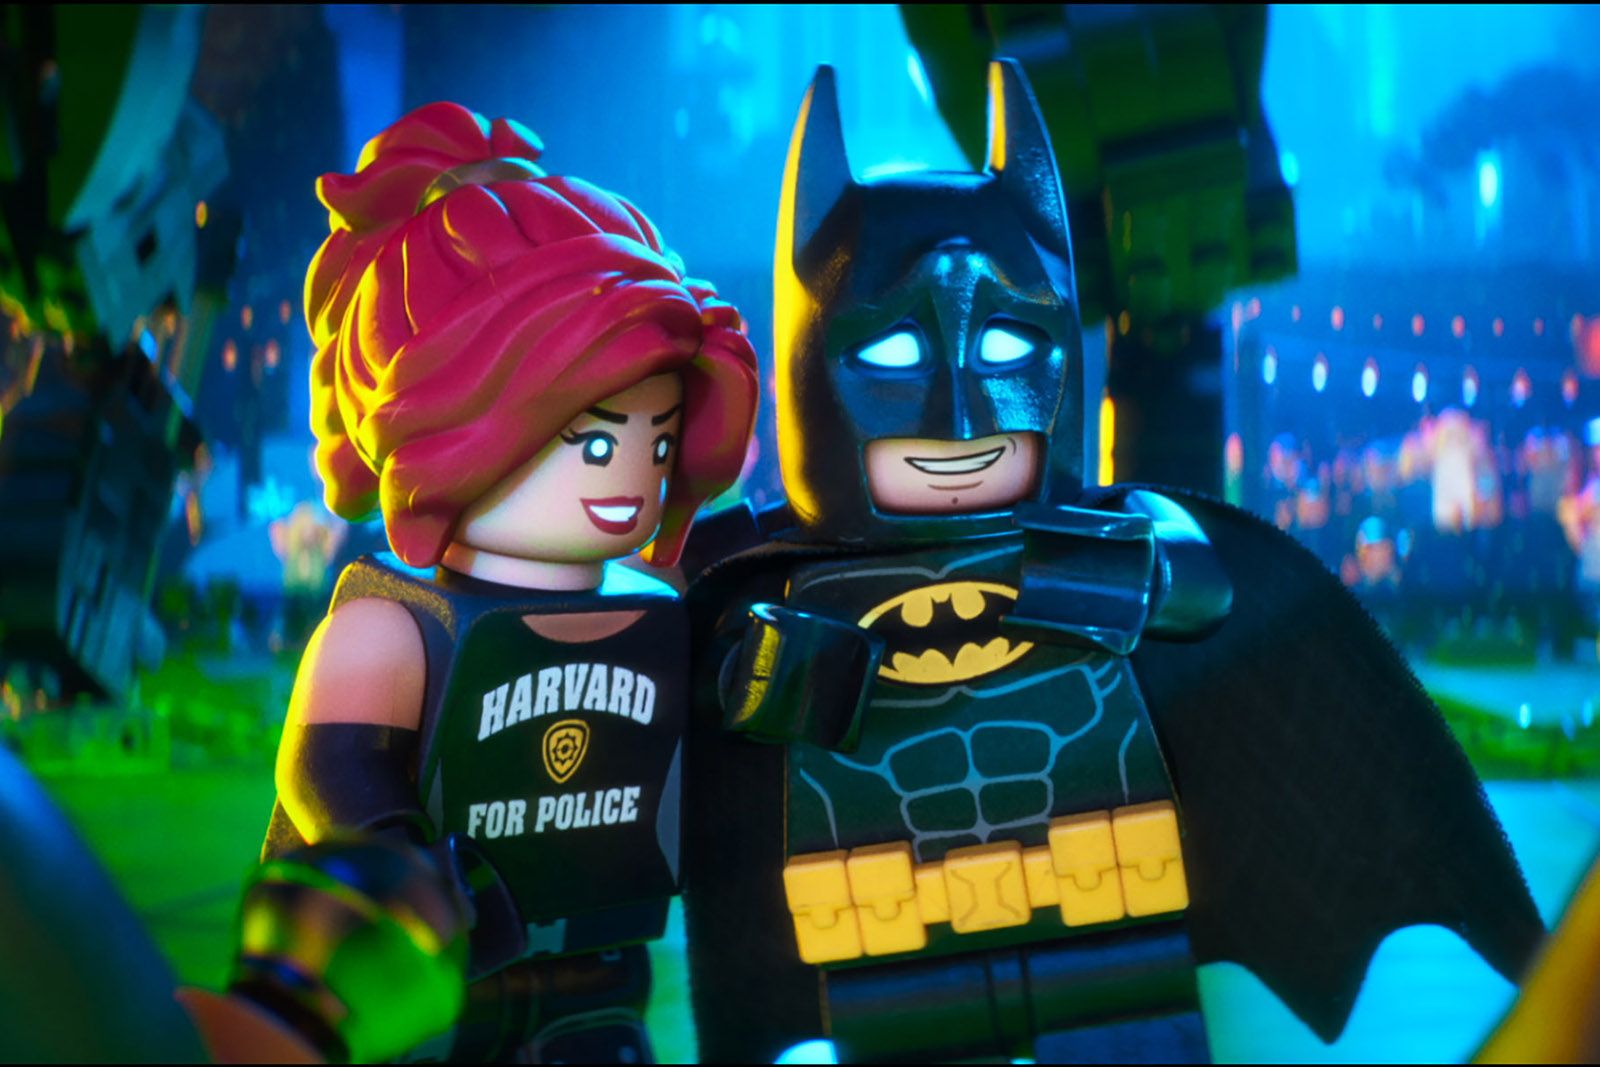 lego batman movie is first 4k hdr film to stream on xbox one s image 1